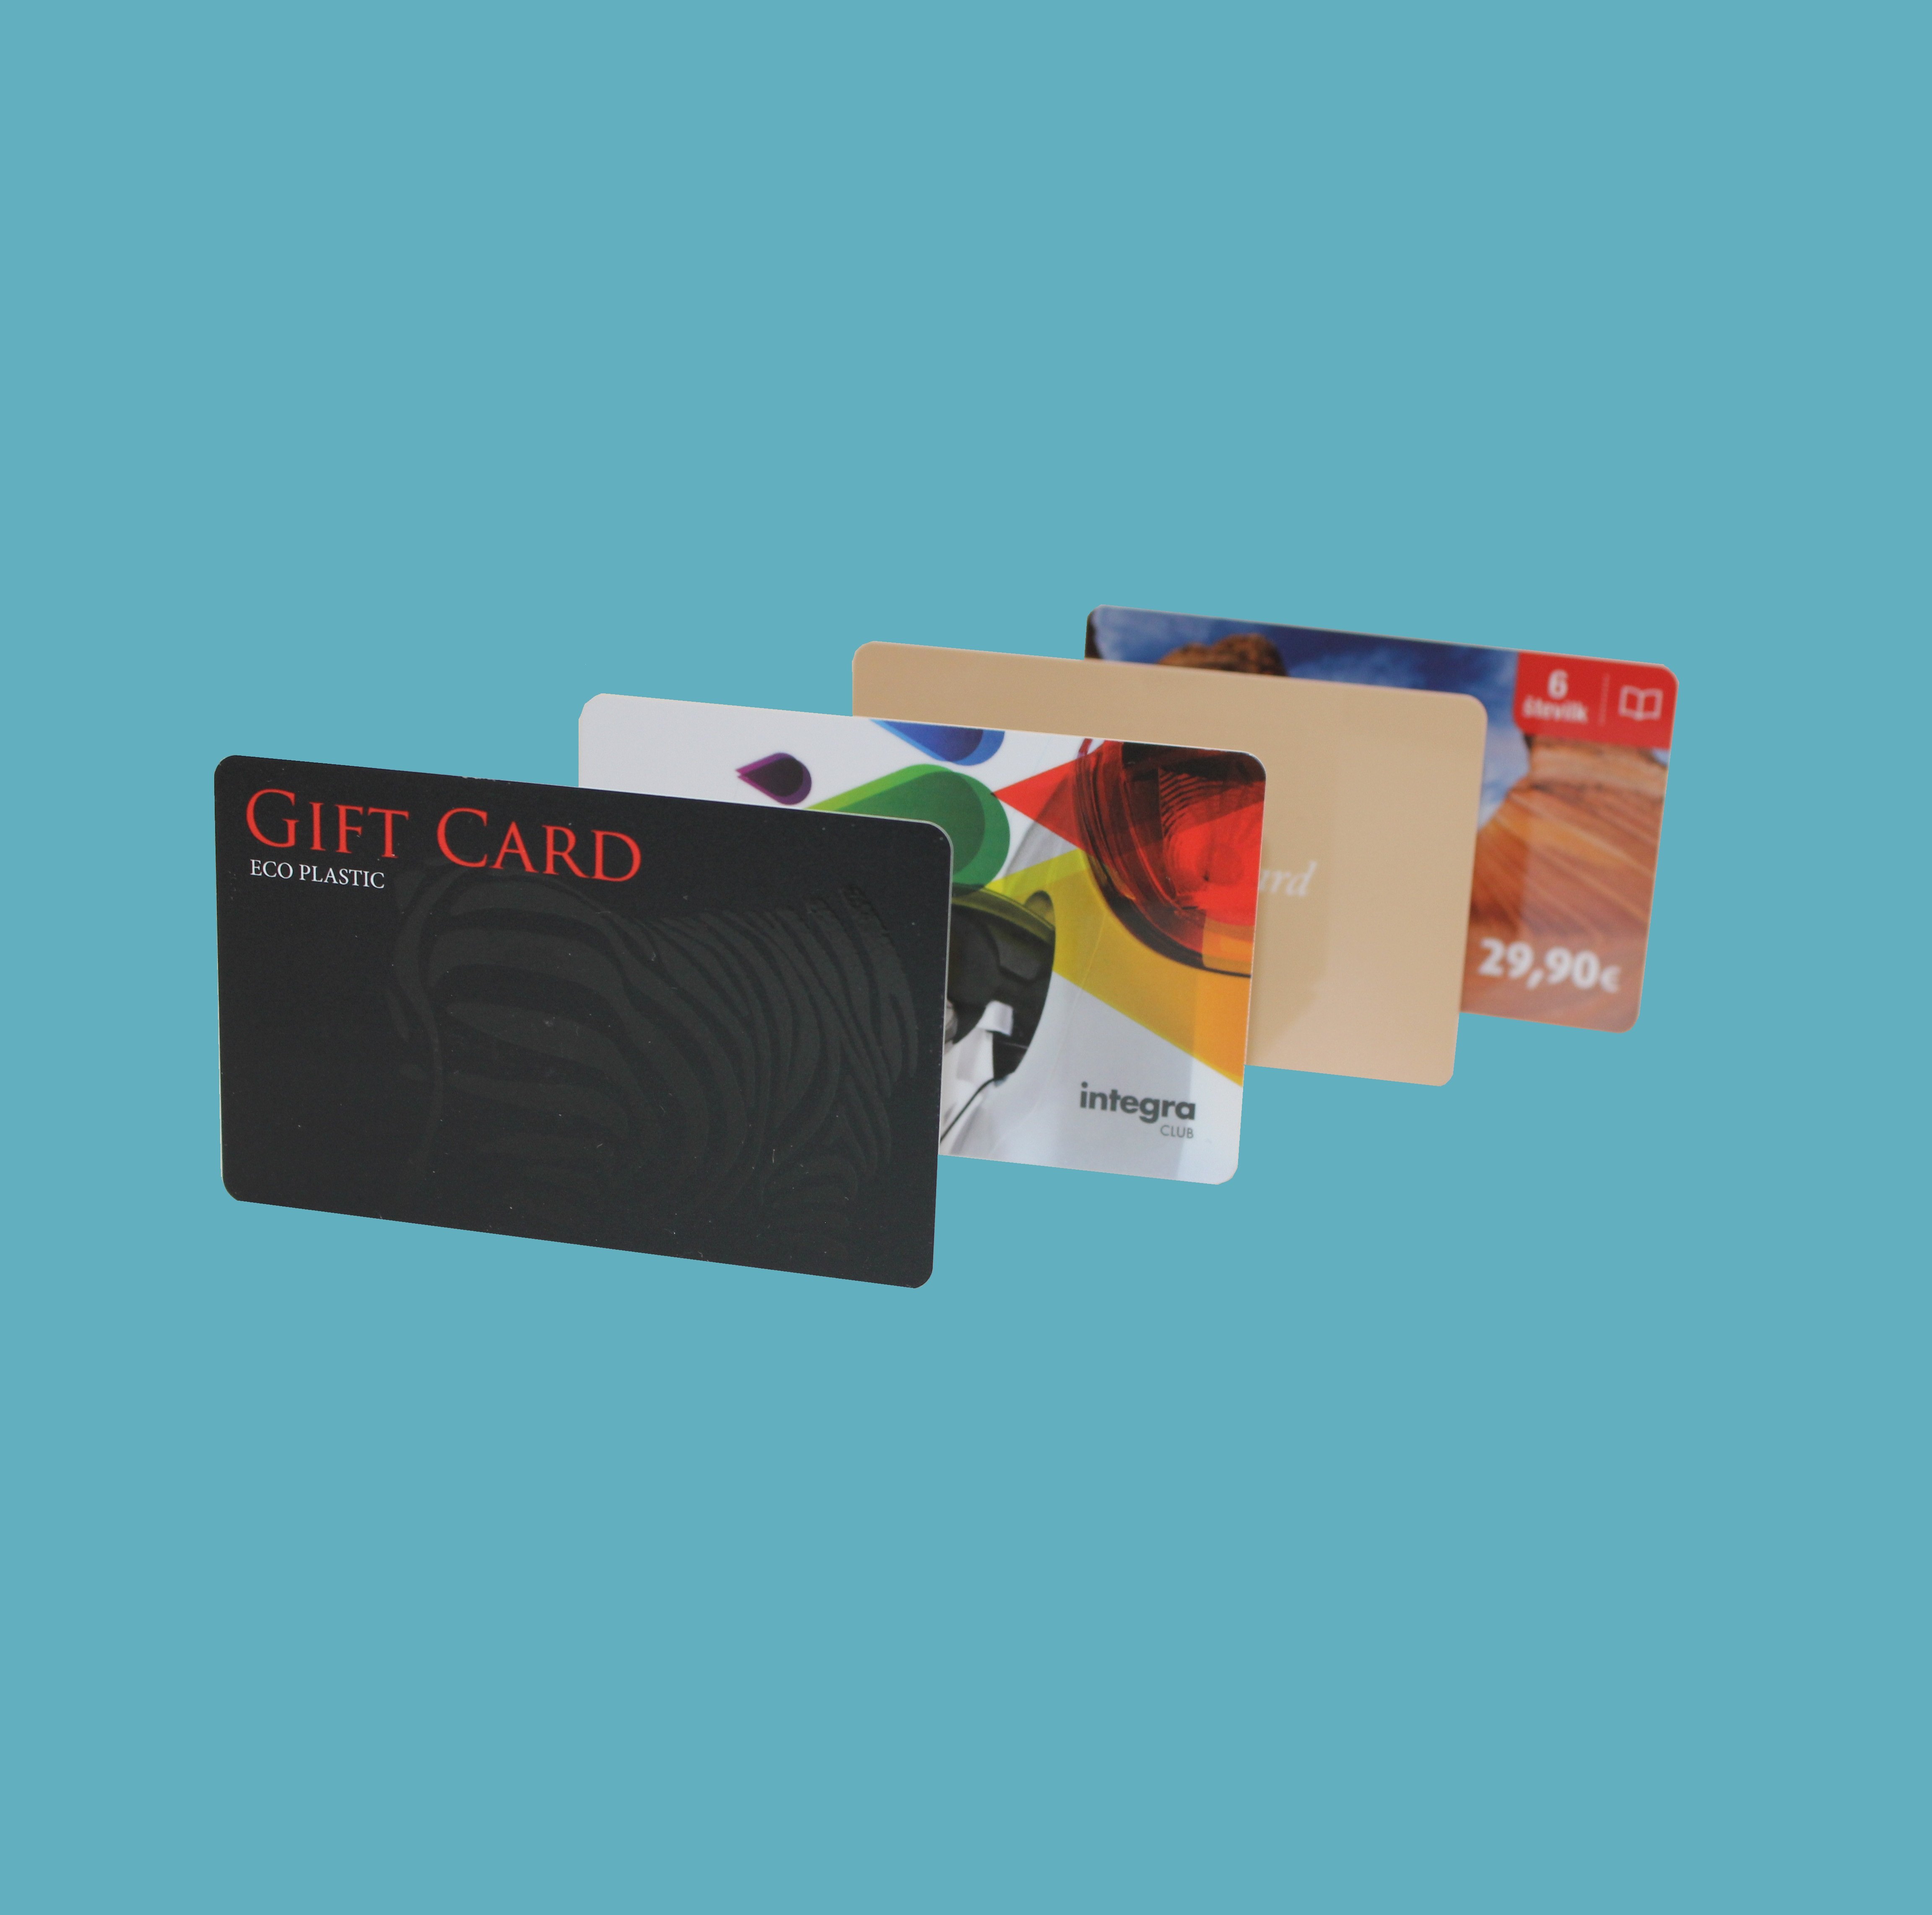 Personalised Plastic Cards, numbering, barcodes, signature strip, double sided, www.ontimeprint.co.uk